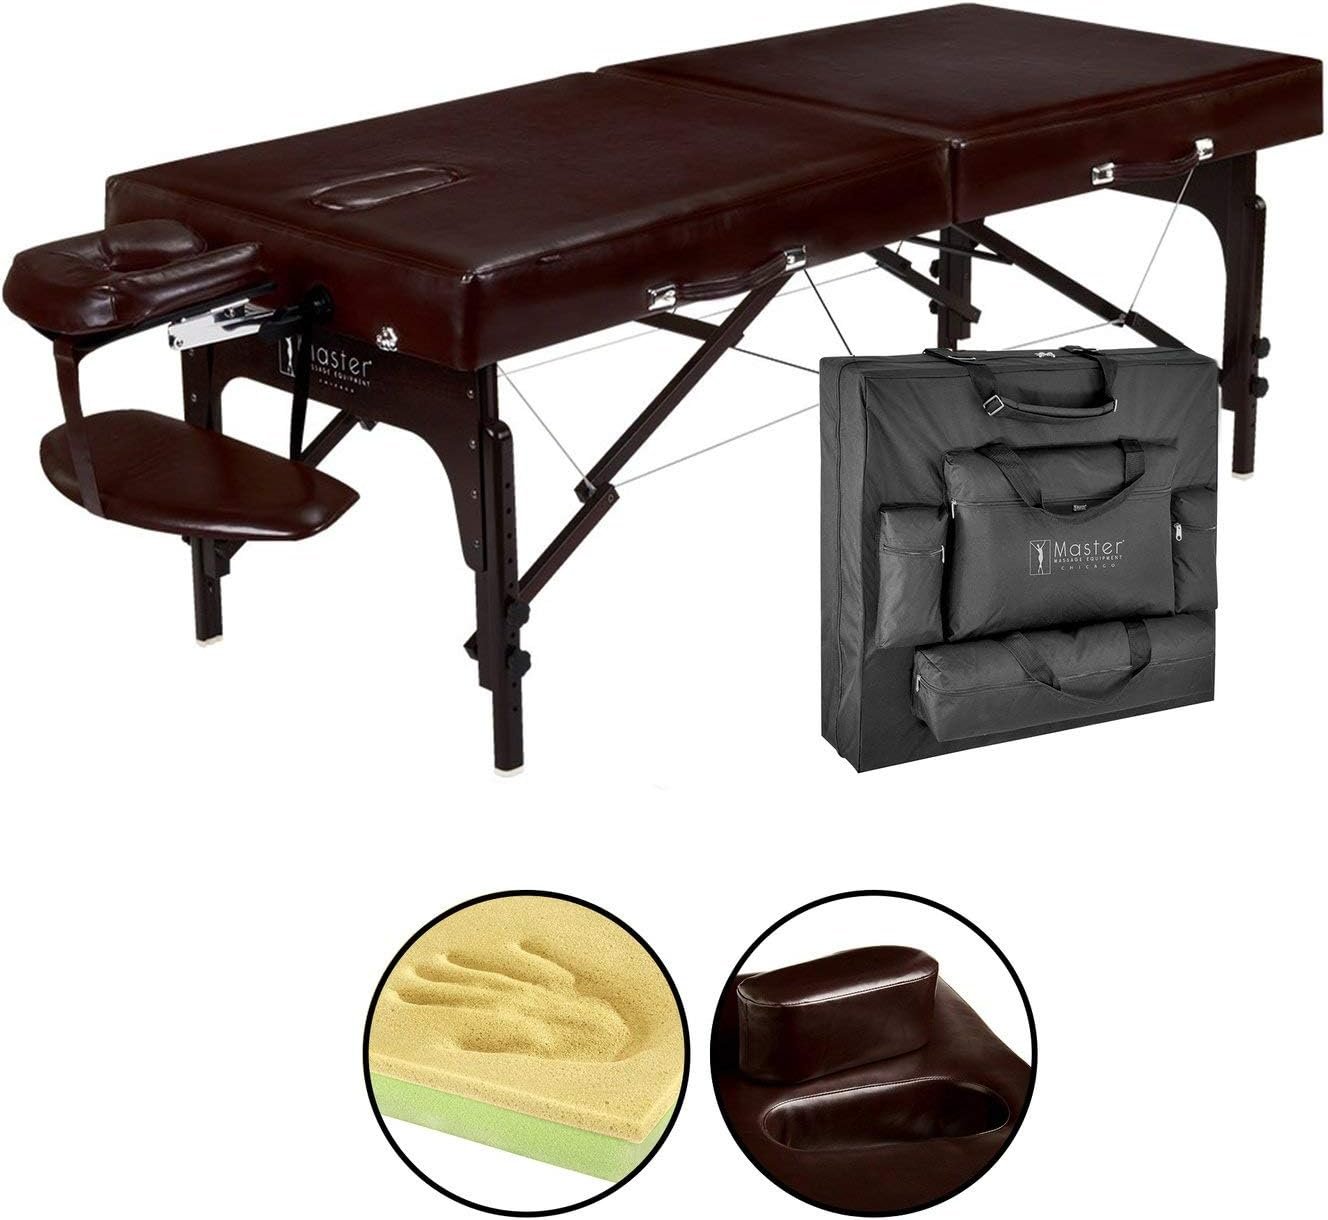 Master Supreme Massage 31 Inch Extra Wide Portable Massage Table, Supreme LX SPA Salon Facial Beauty Bed, Easy Set Up, 3 Thick of Memory Foam, PU Upholstery (Coffee)